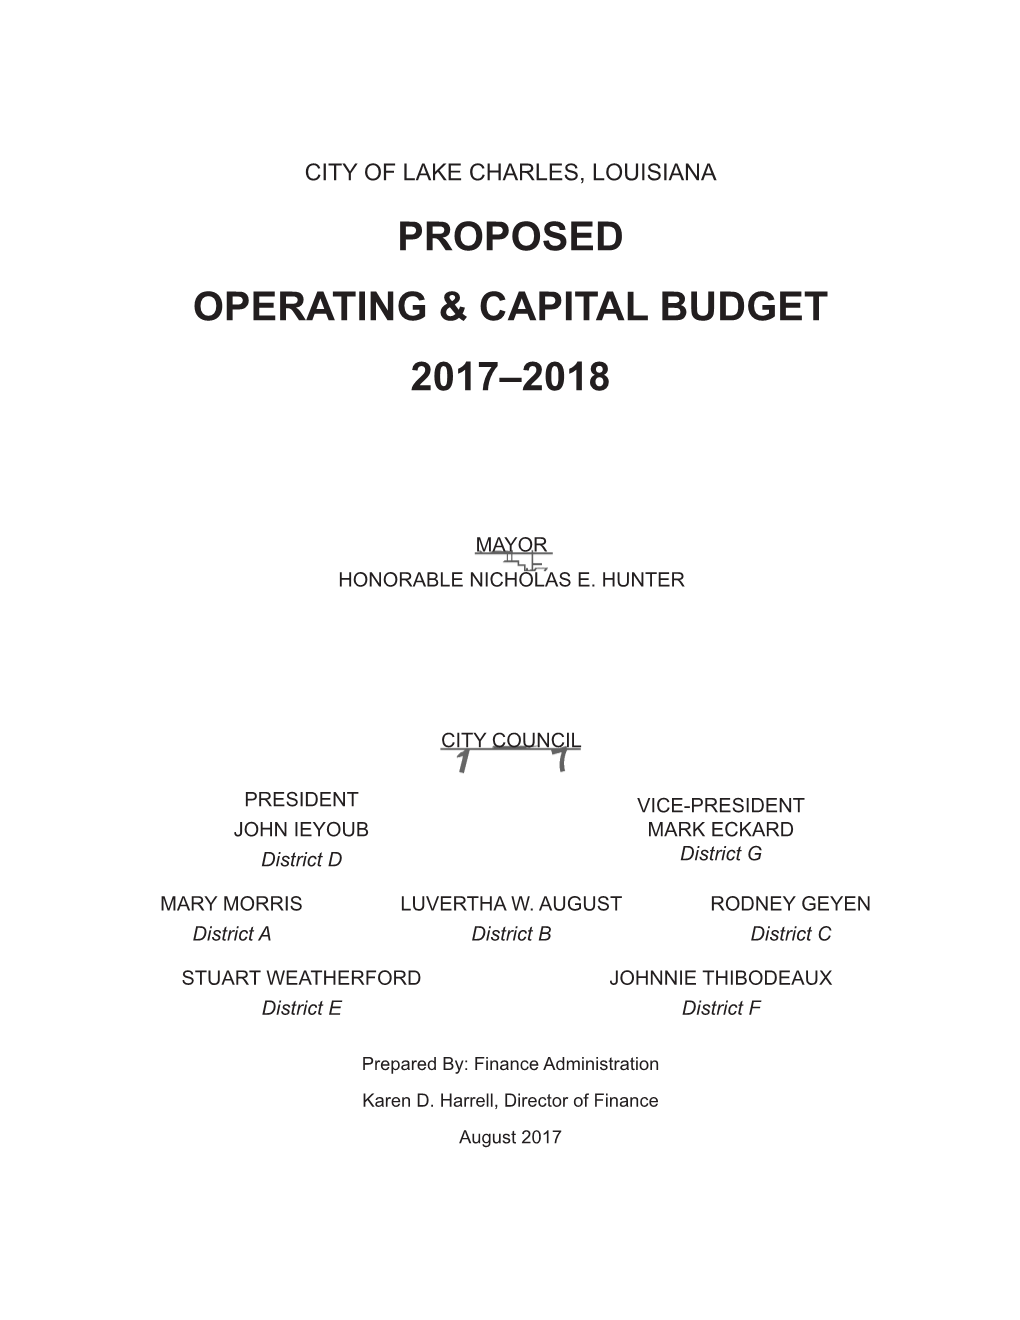 Proposed Capital and Operating Budget 2017-2018